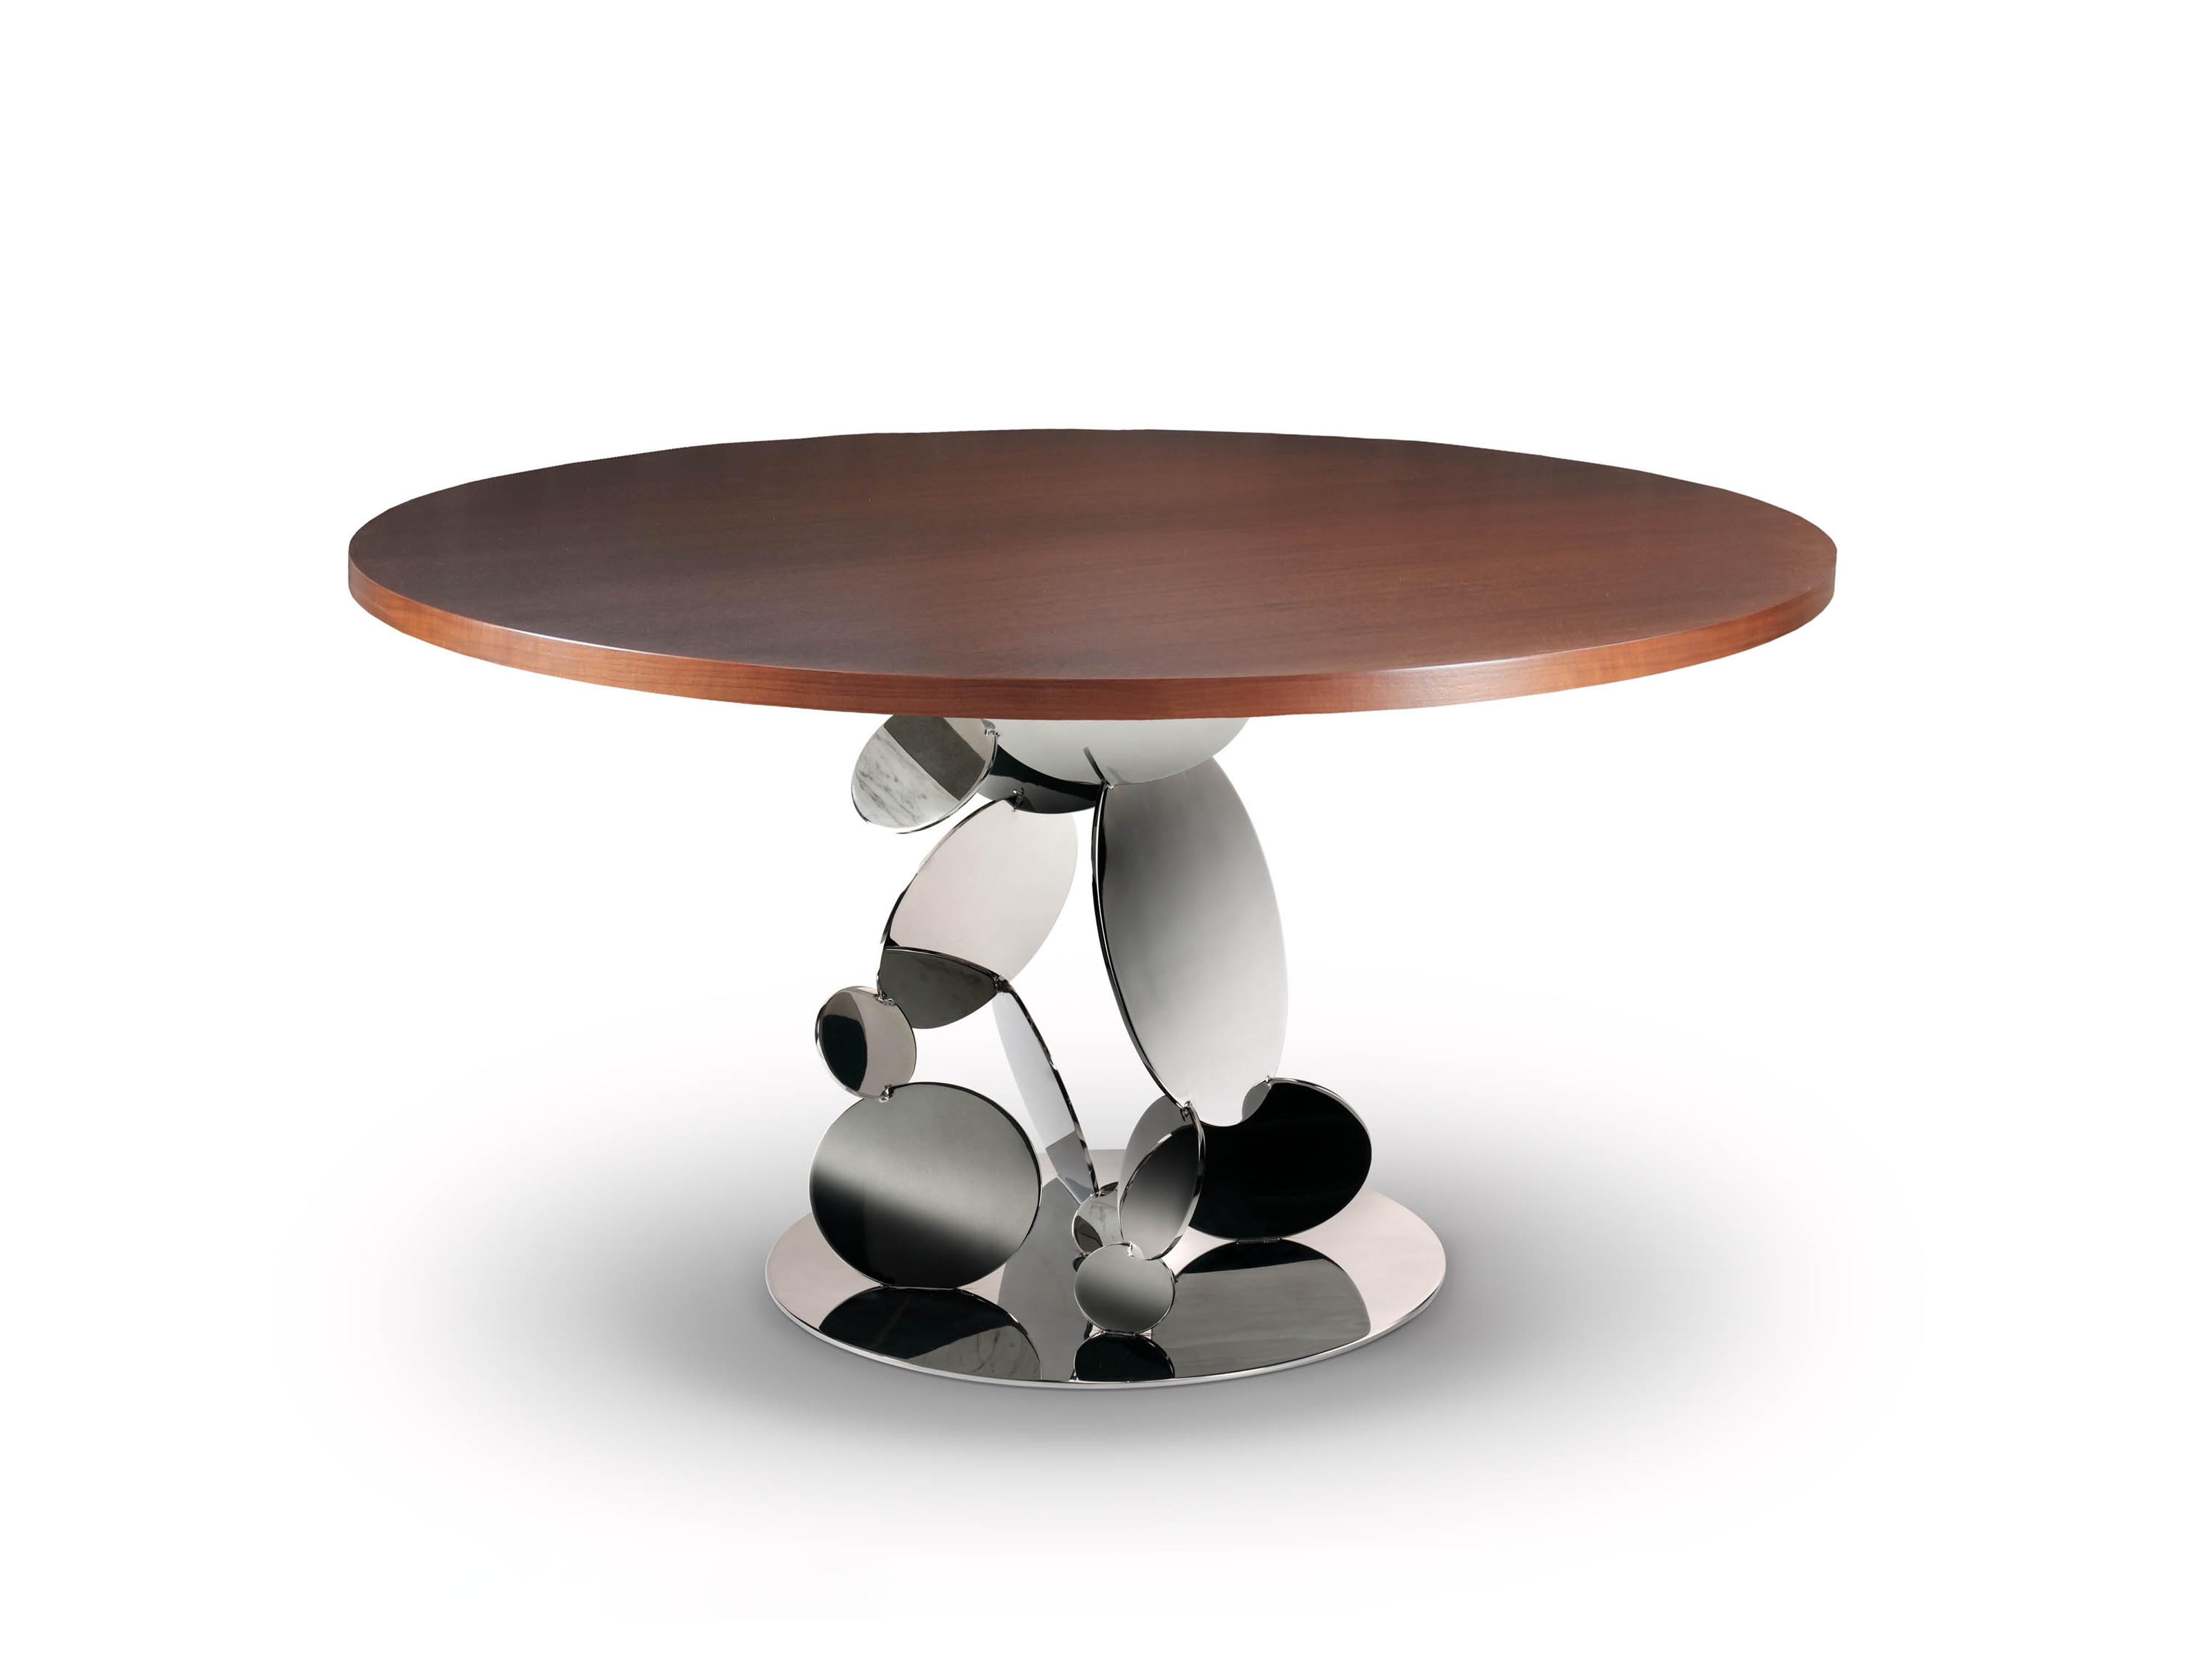 Extraordinary dining round table with a structure that is made up of multiple stainless steel disks welded one by one to each other to create a rigid structure. In addition to being hand welded, the whole structure is also finely hand polished in